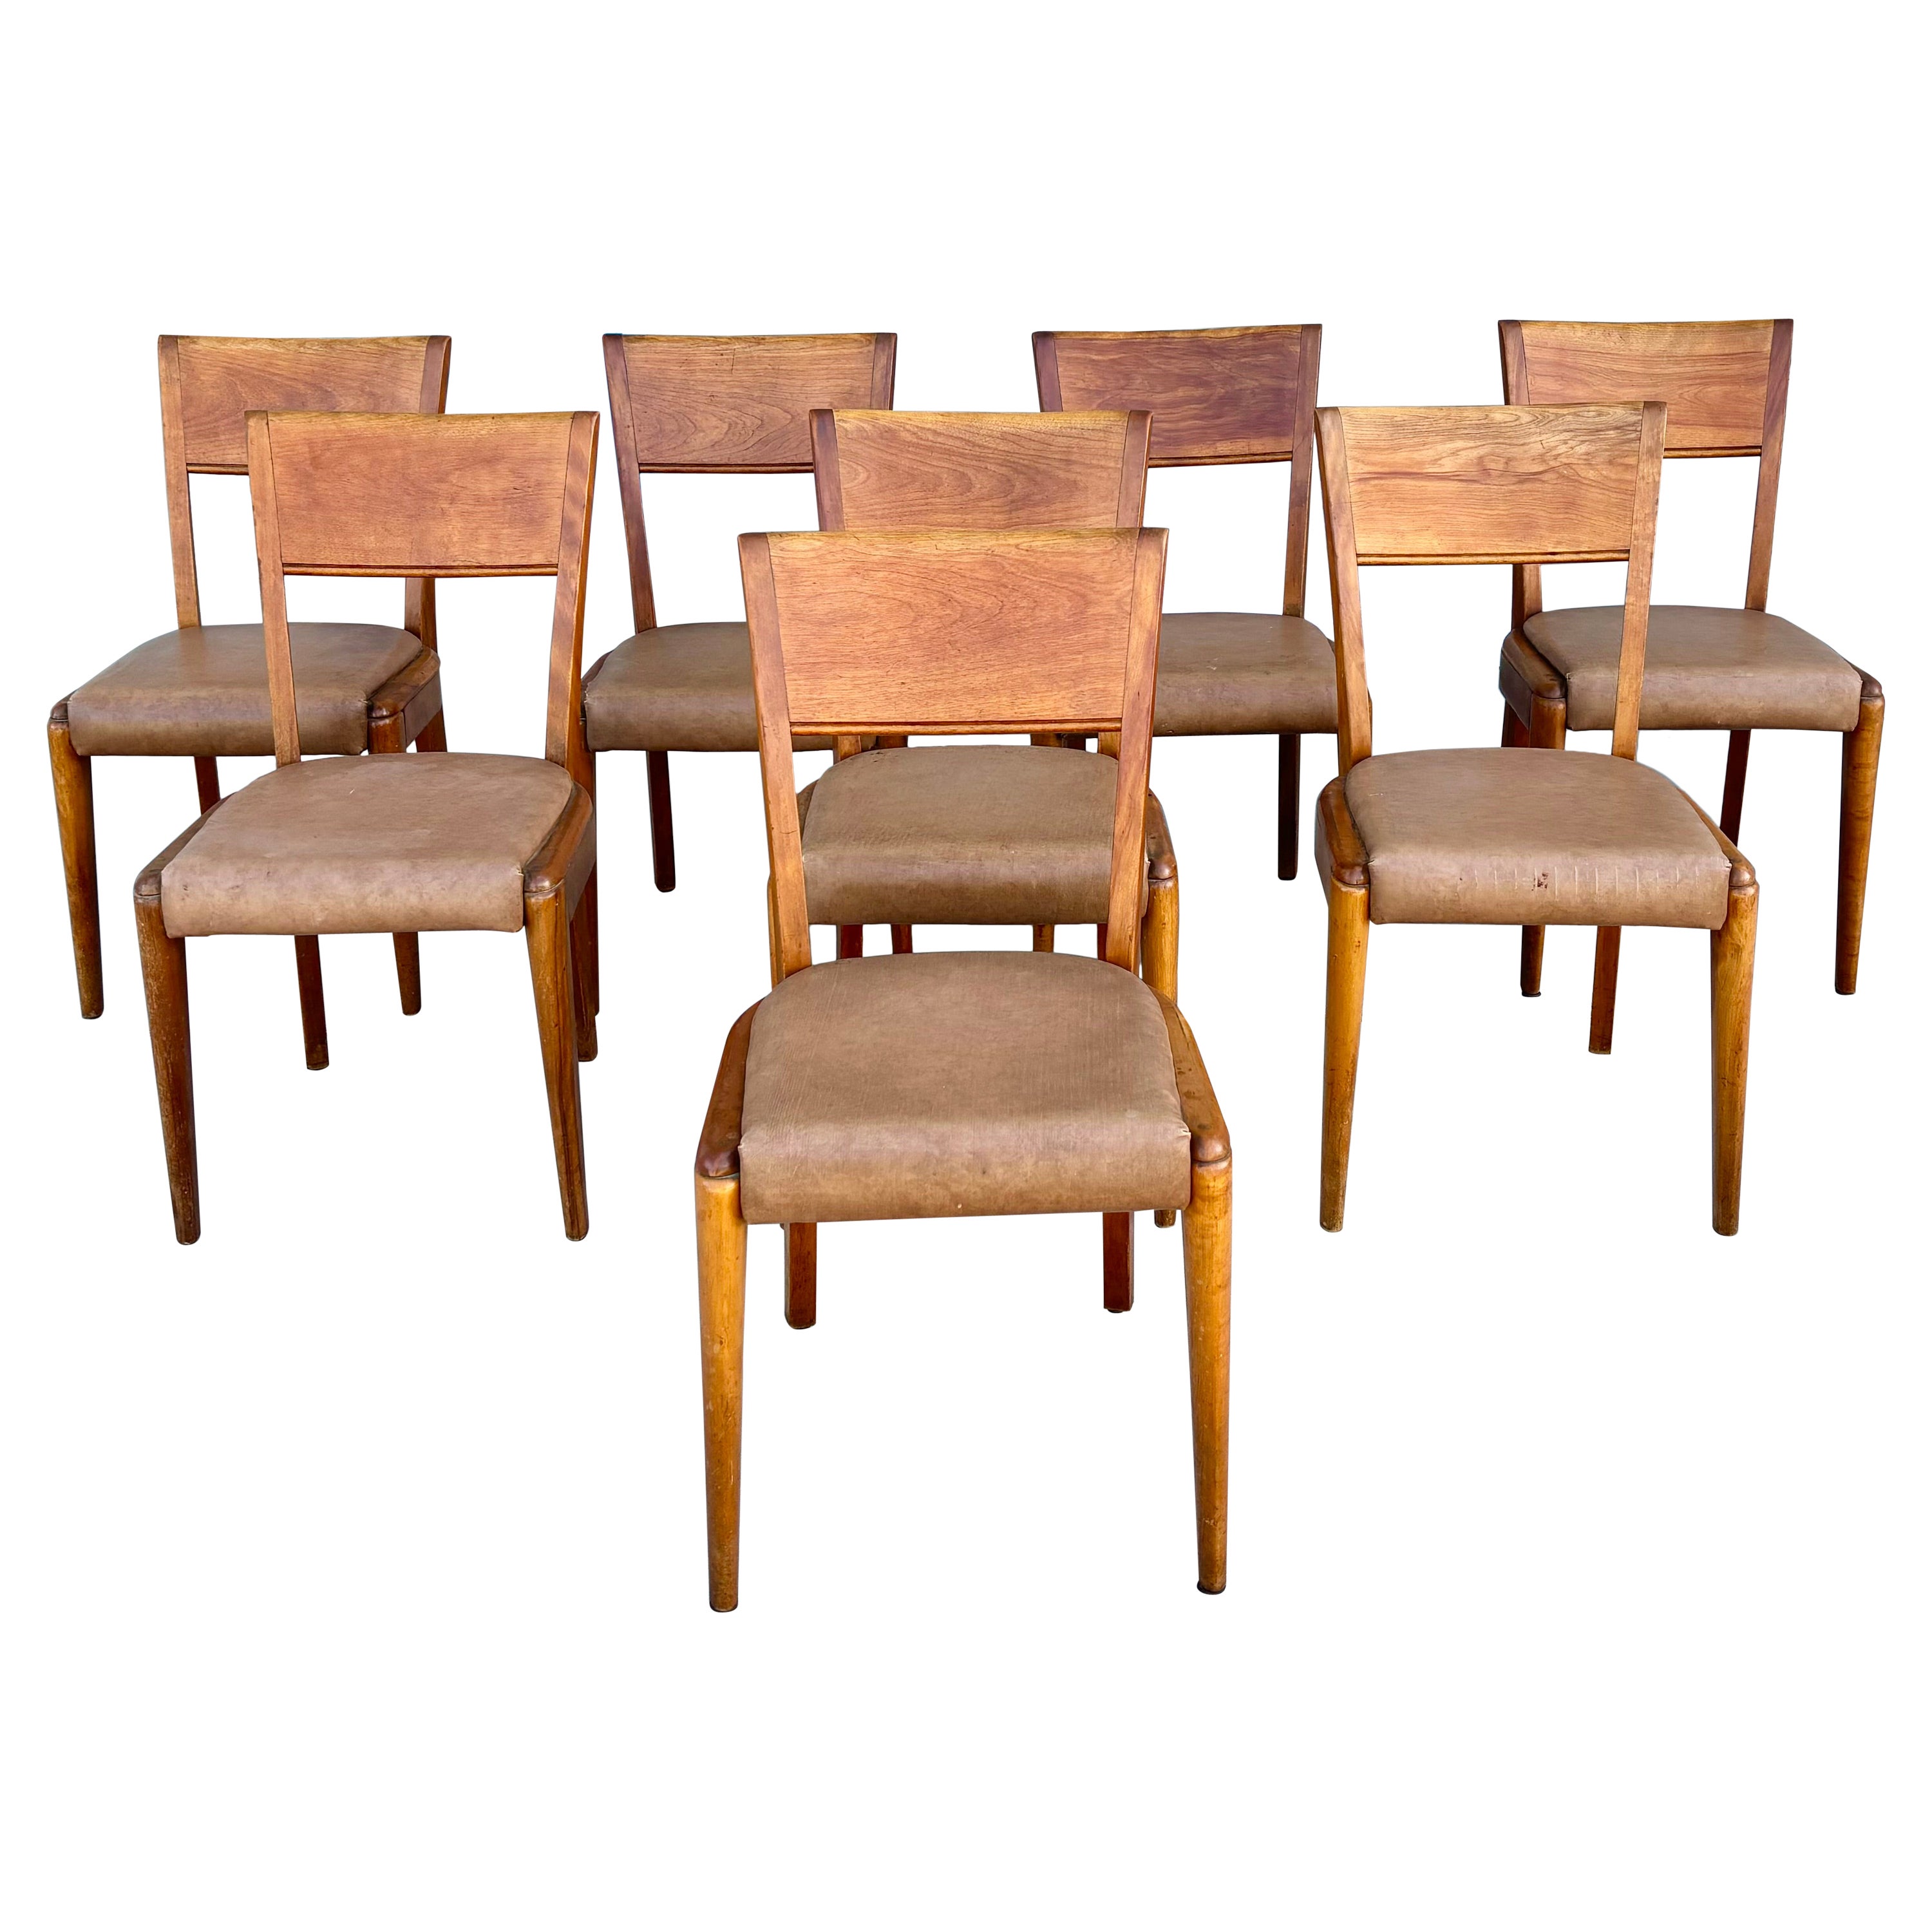 1960s Mid Century Maple Dining Chairs by Heywood Wakefield - Set of 8 For Sale